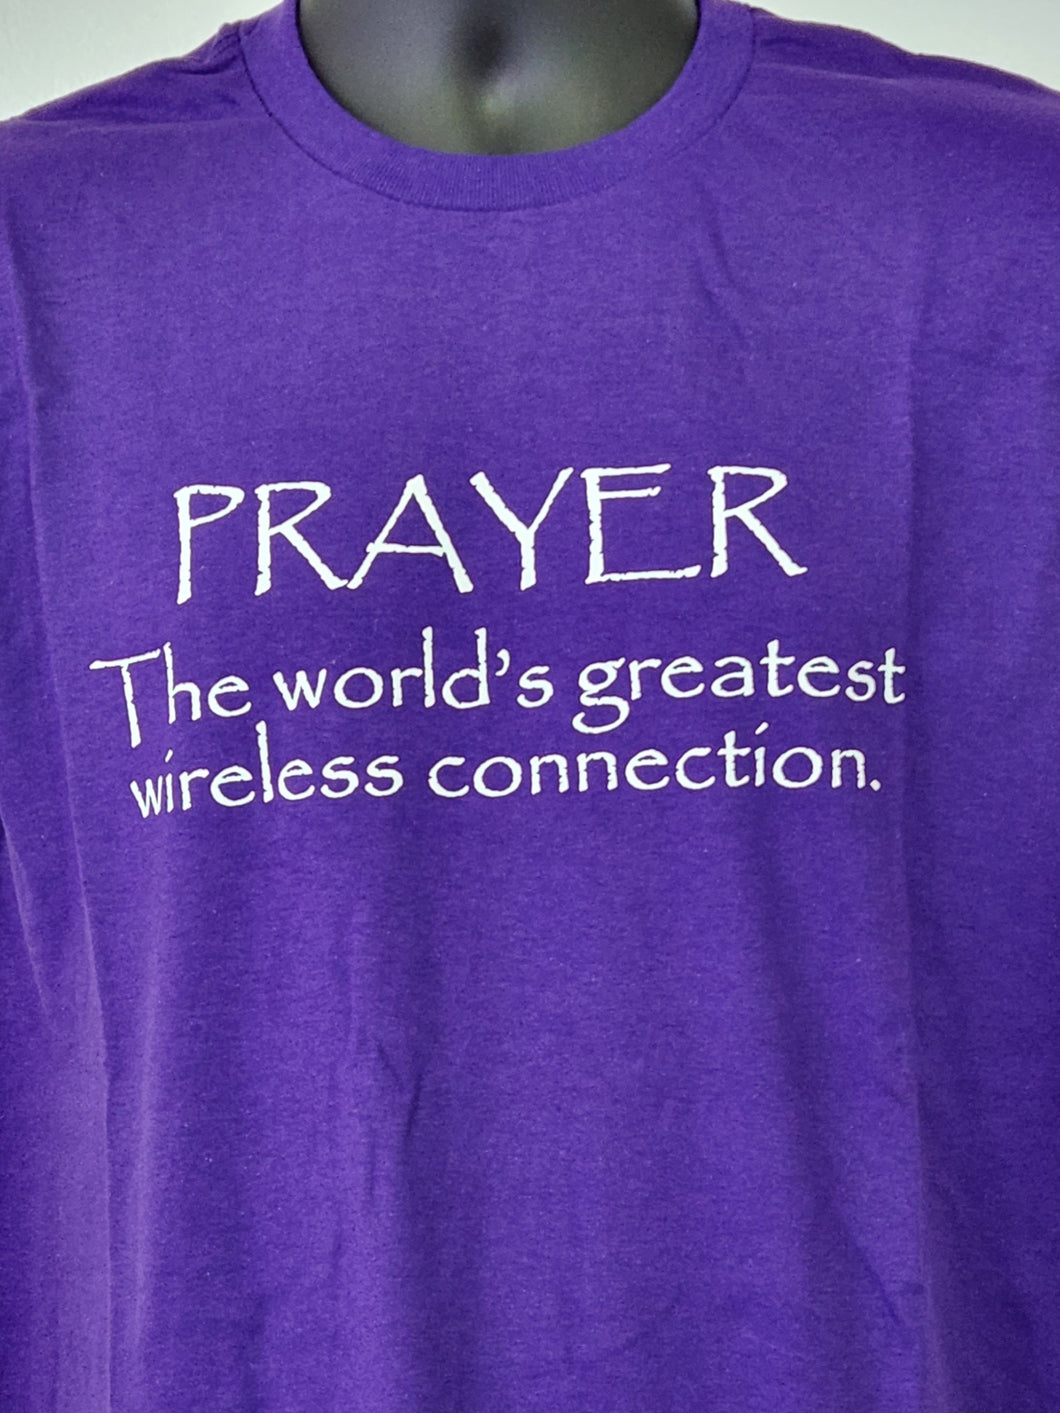 PRAYER THE WORLD'S GREATEST WIRELESS CONNECTION